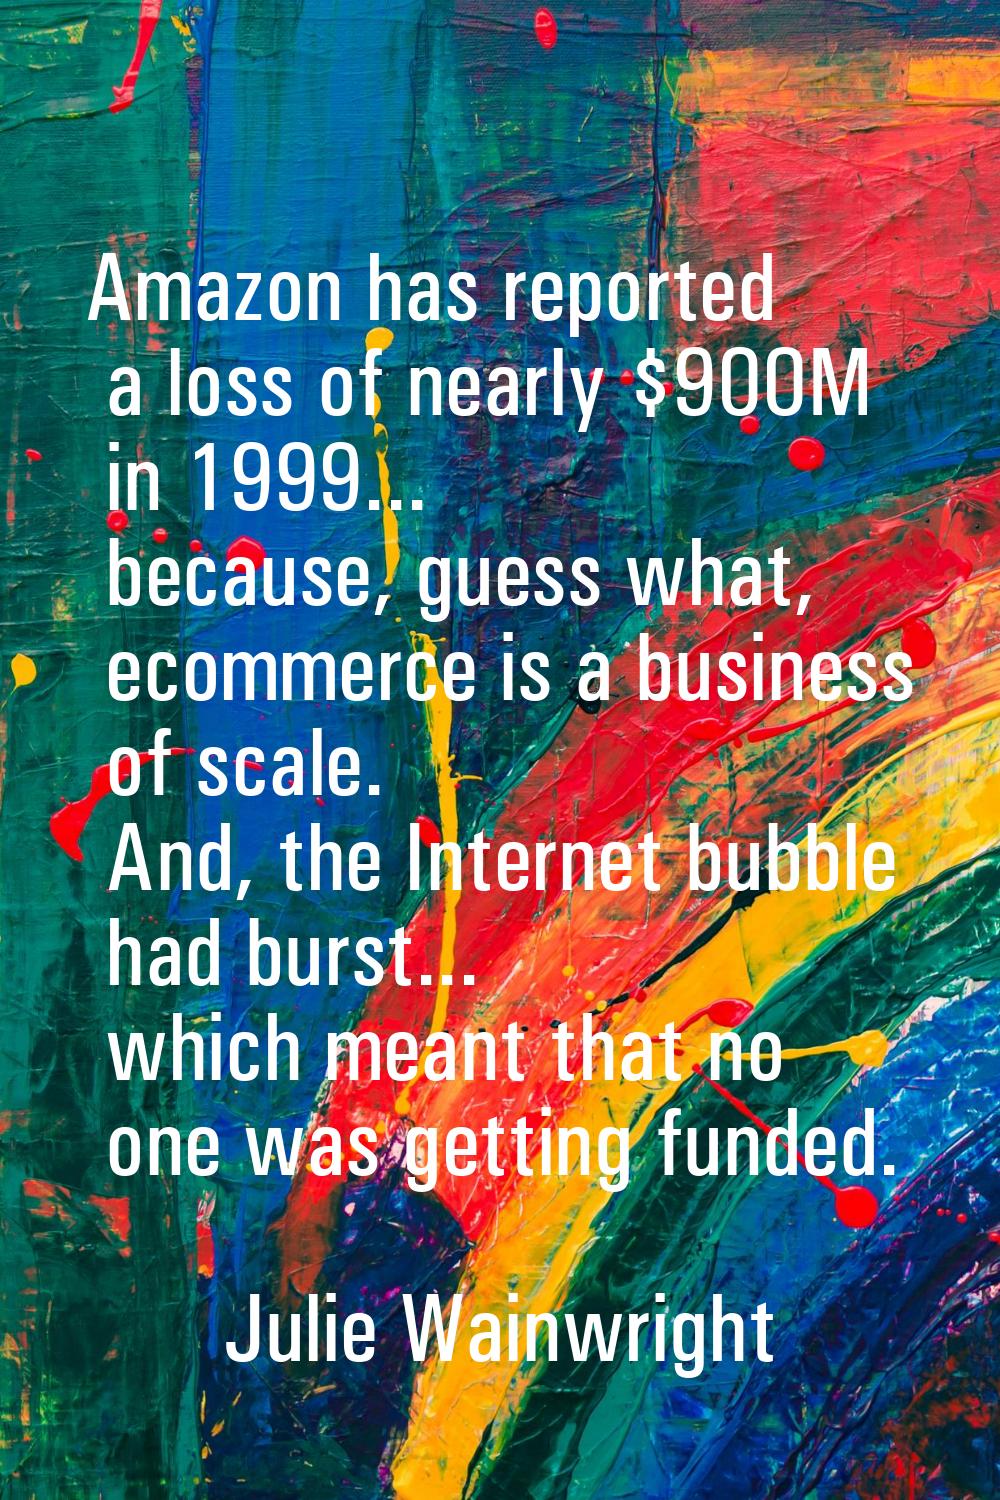 Amazon has reported a loss of nearly $900M in 1999... because, guess what, ecommerce is a business 